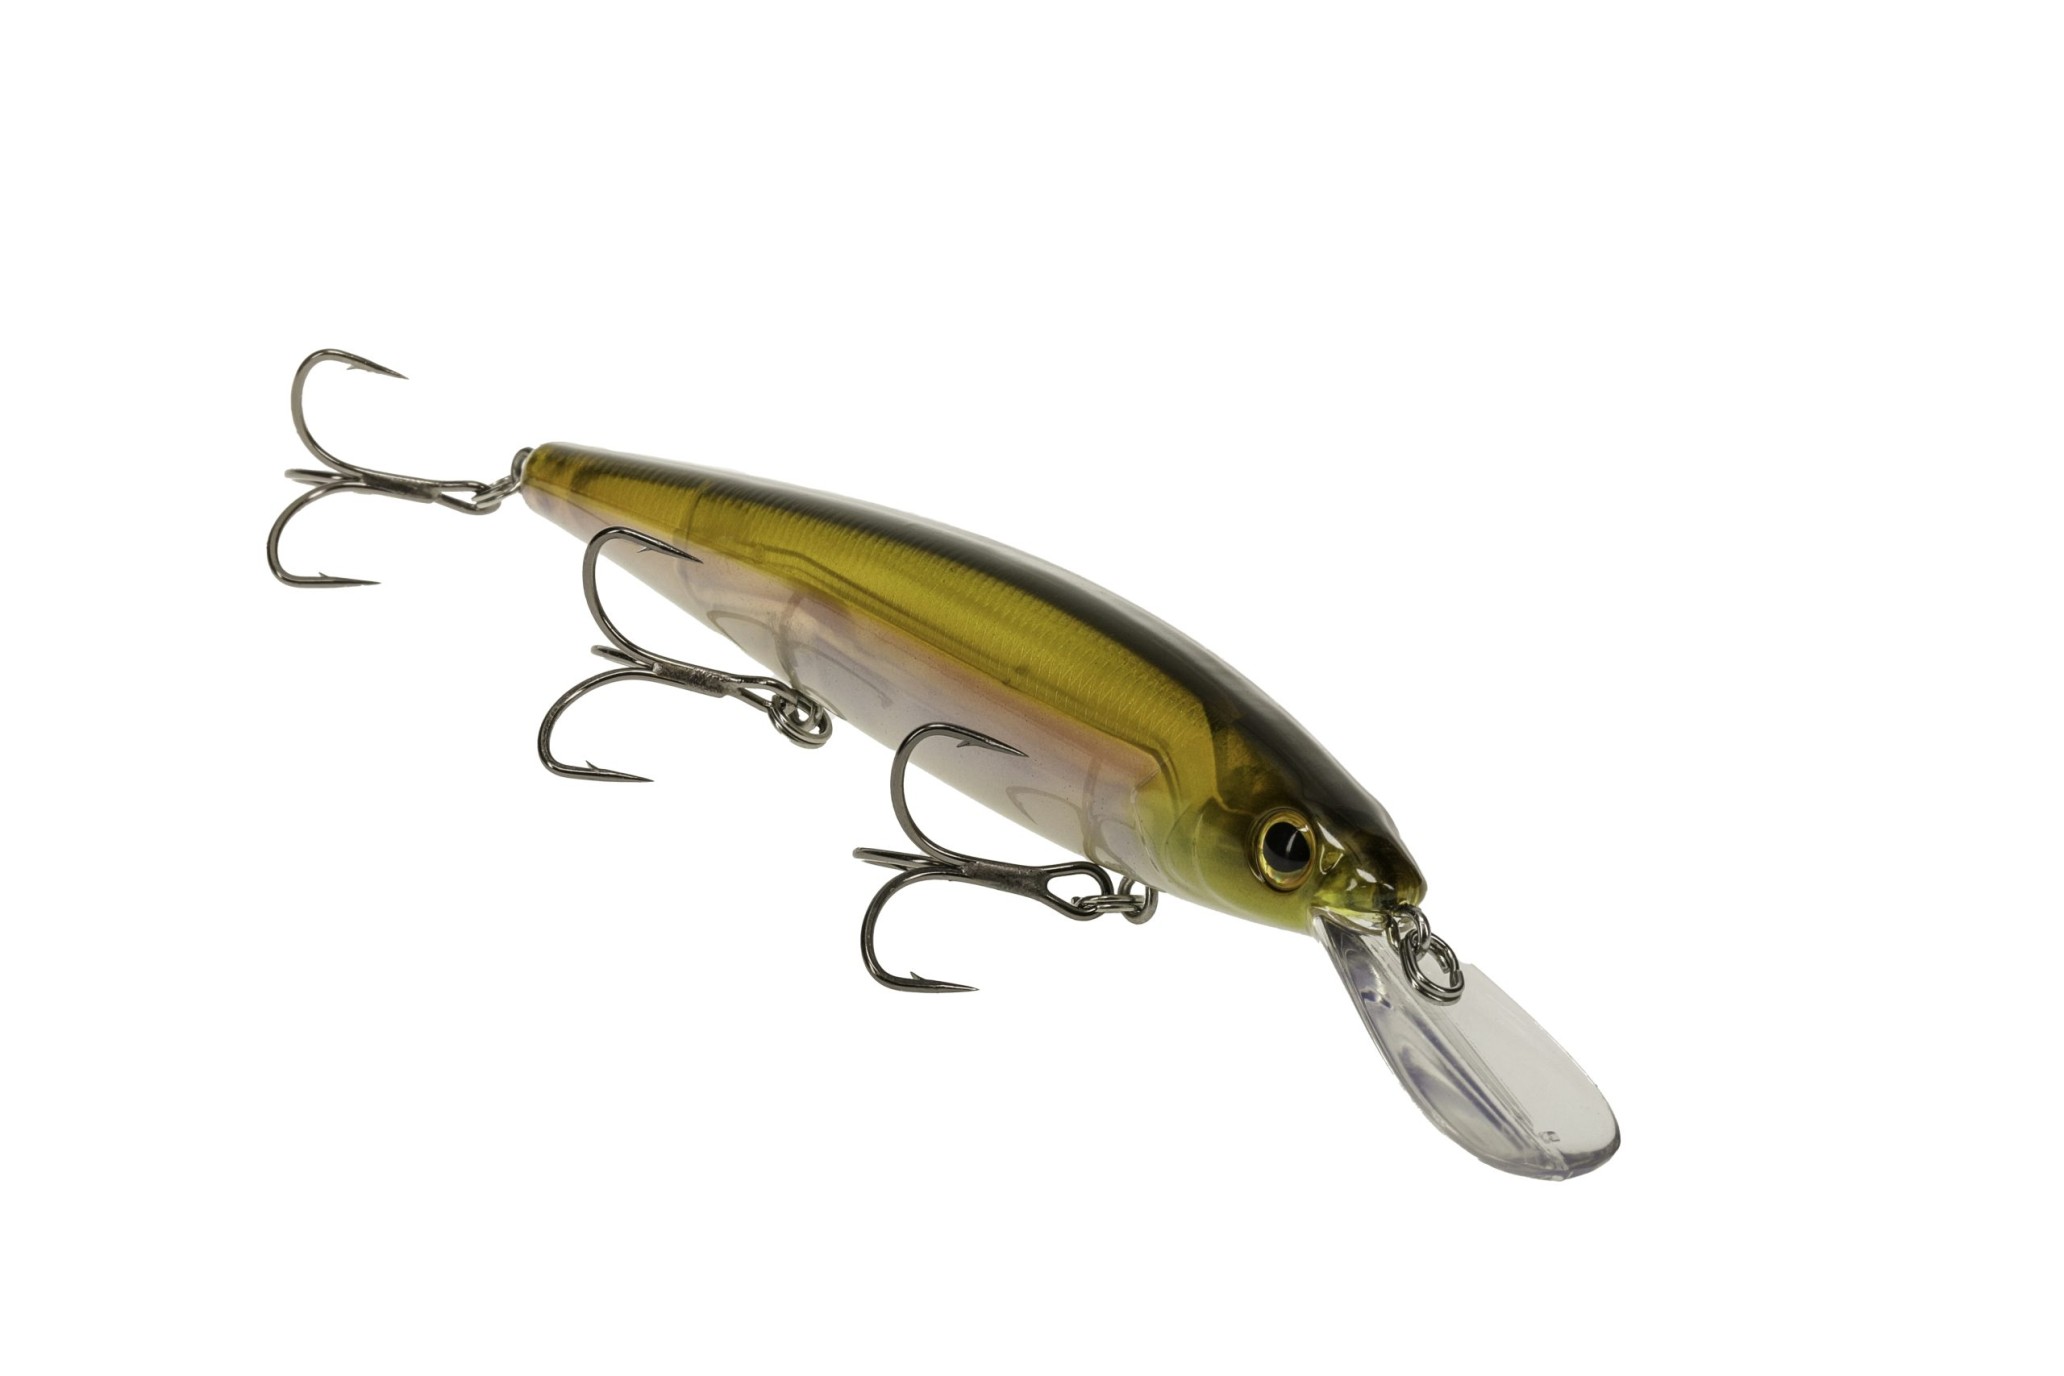 Dynamic Lures HD TROUT (9 Mile Goby) Fishing Lure